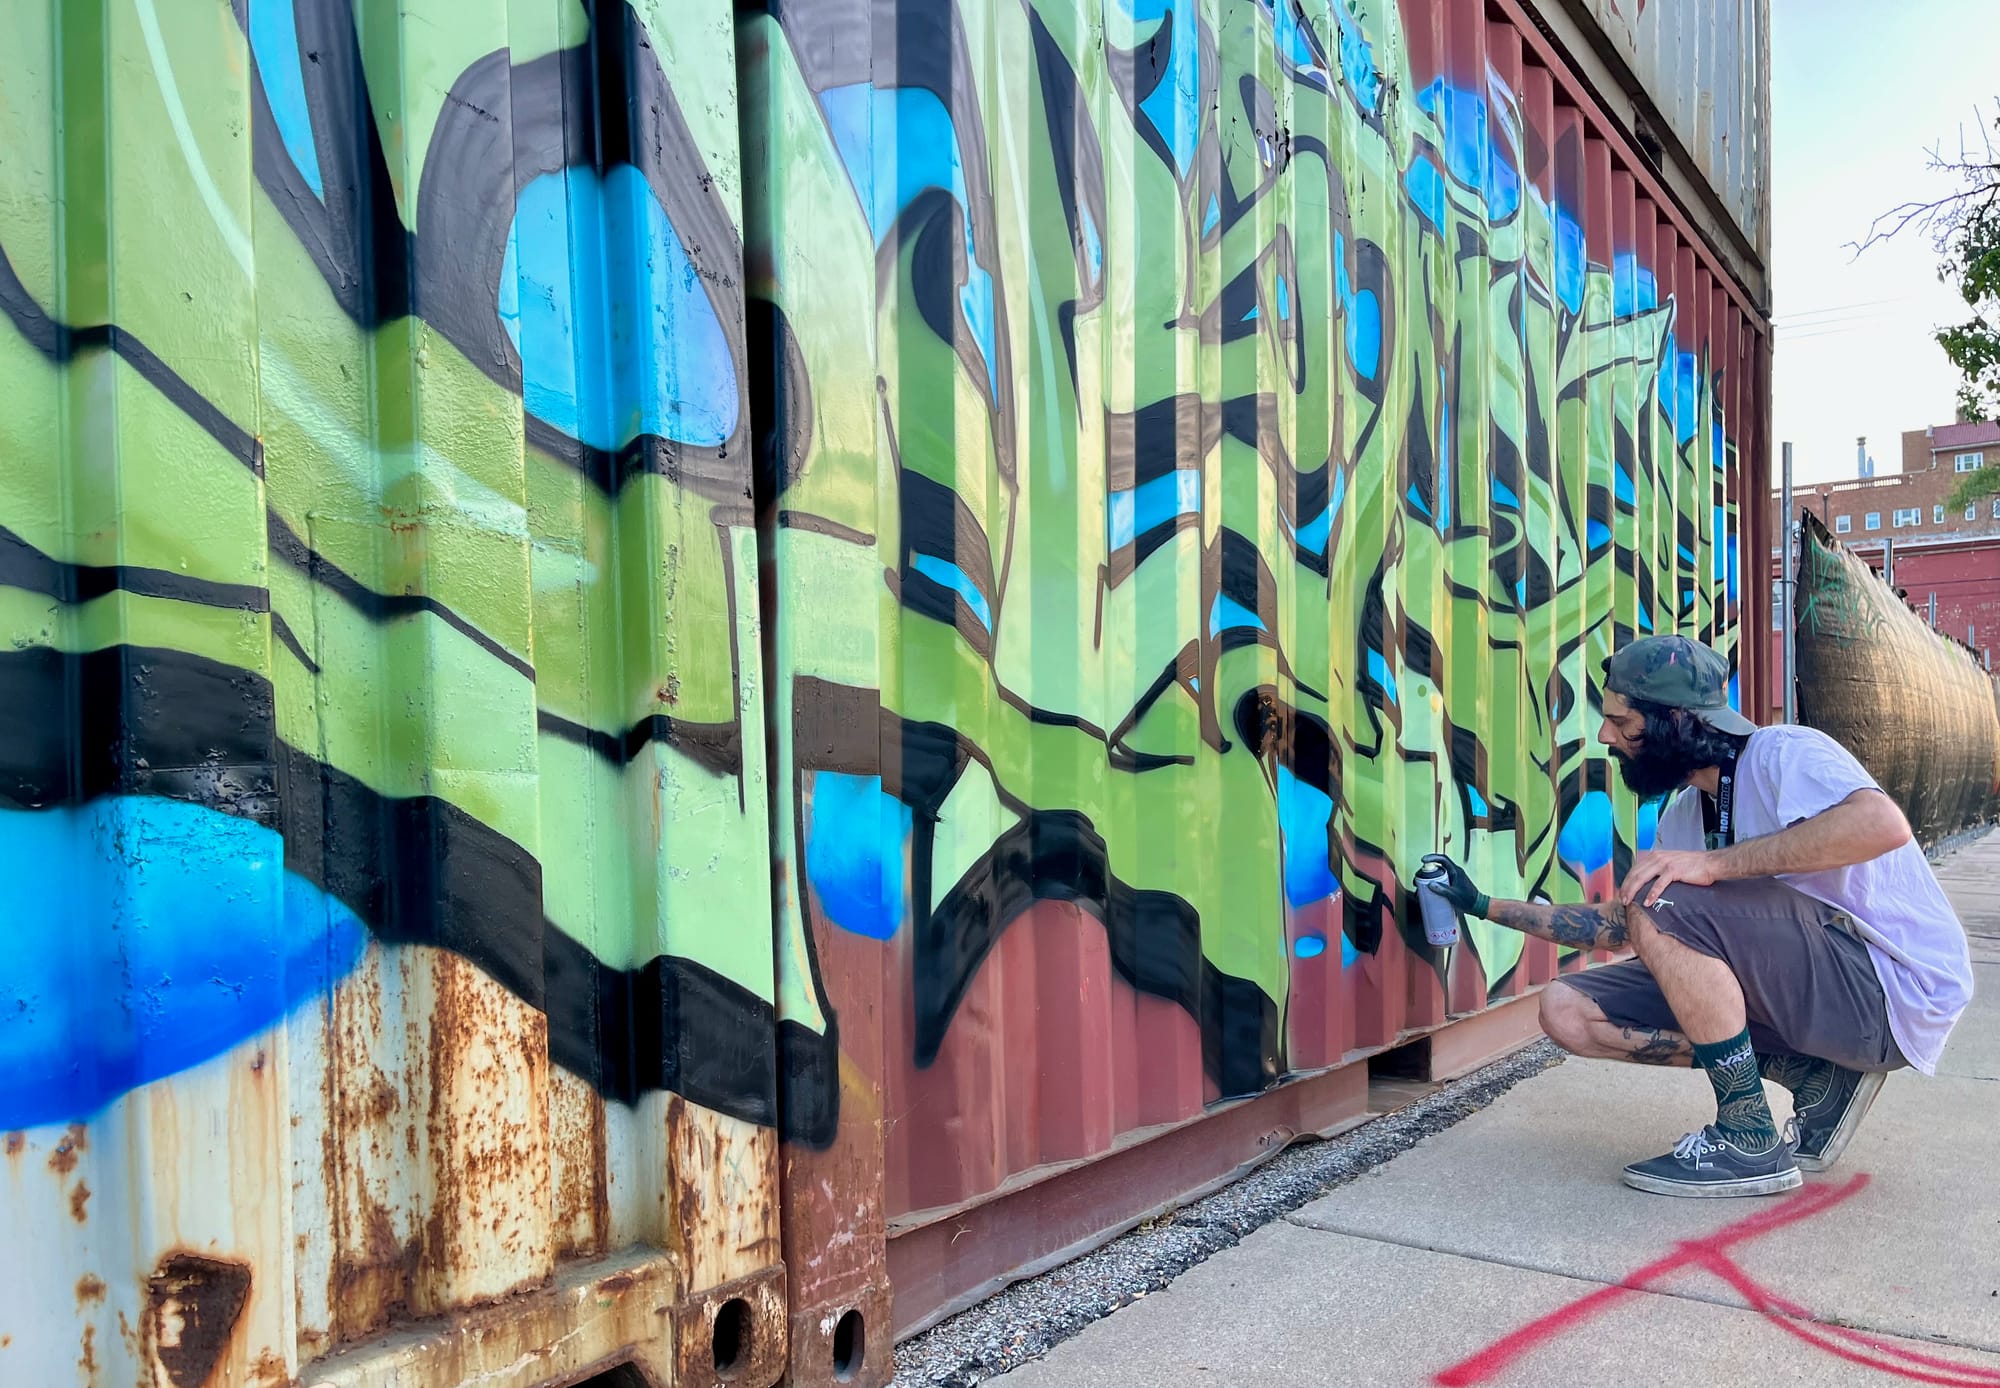 A graffiti-covered music festival lands in downtown Wichita this weekend